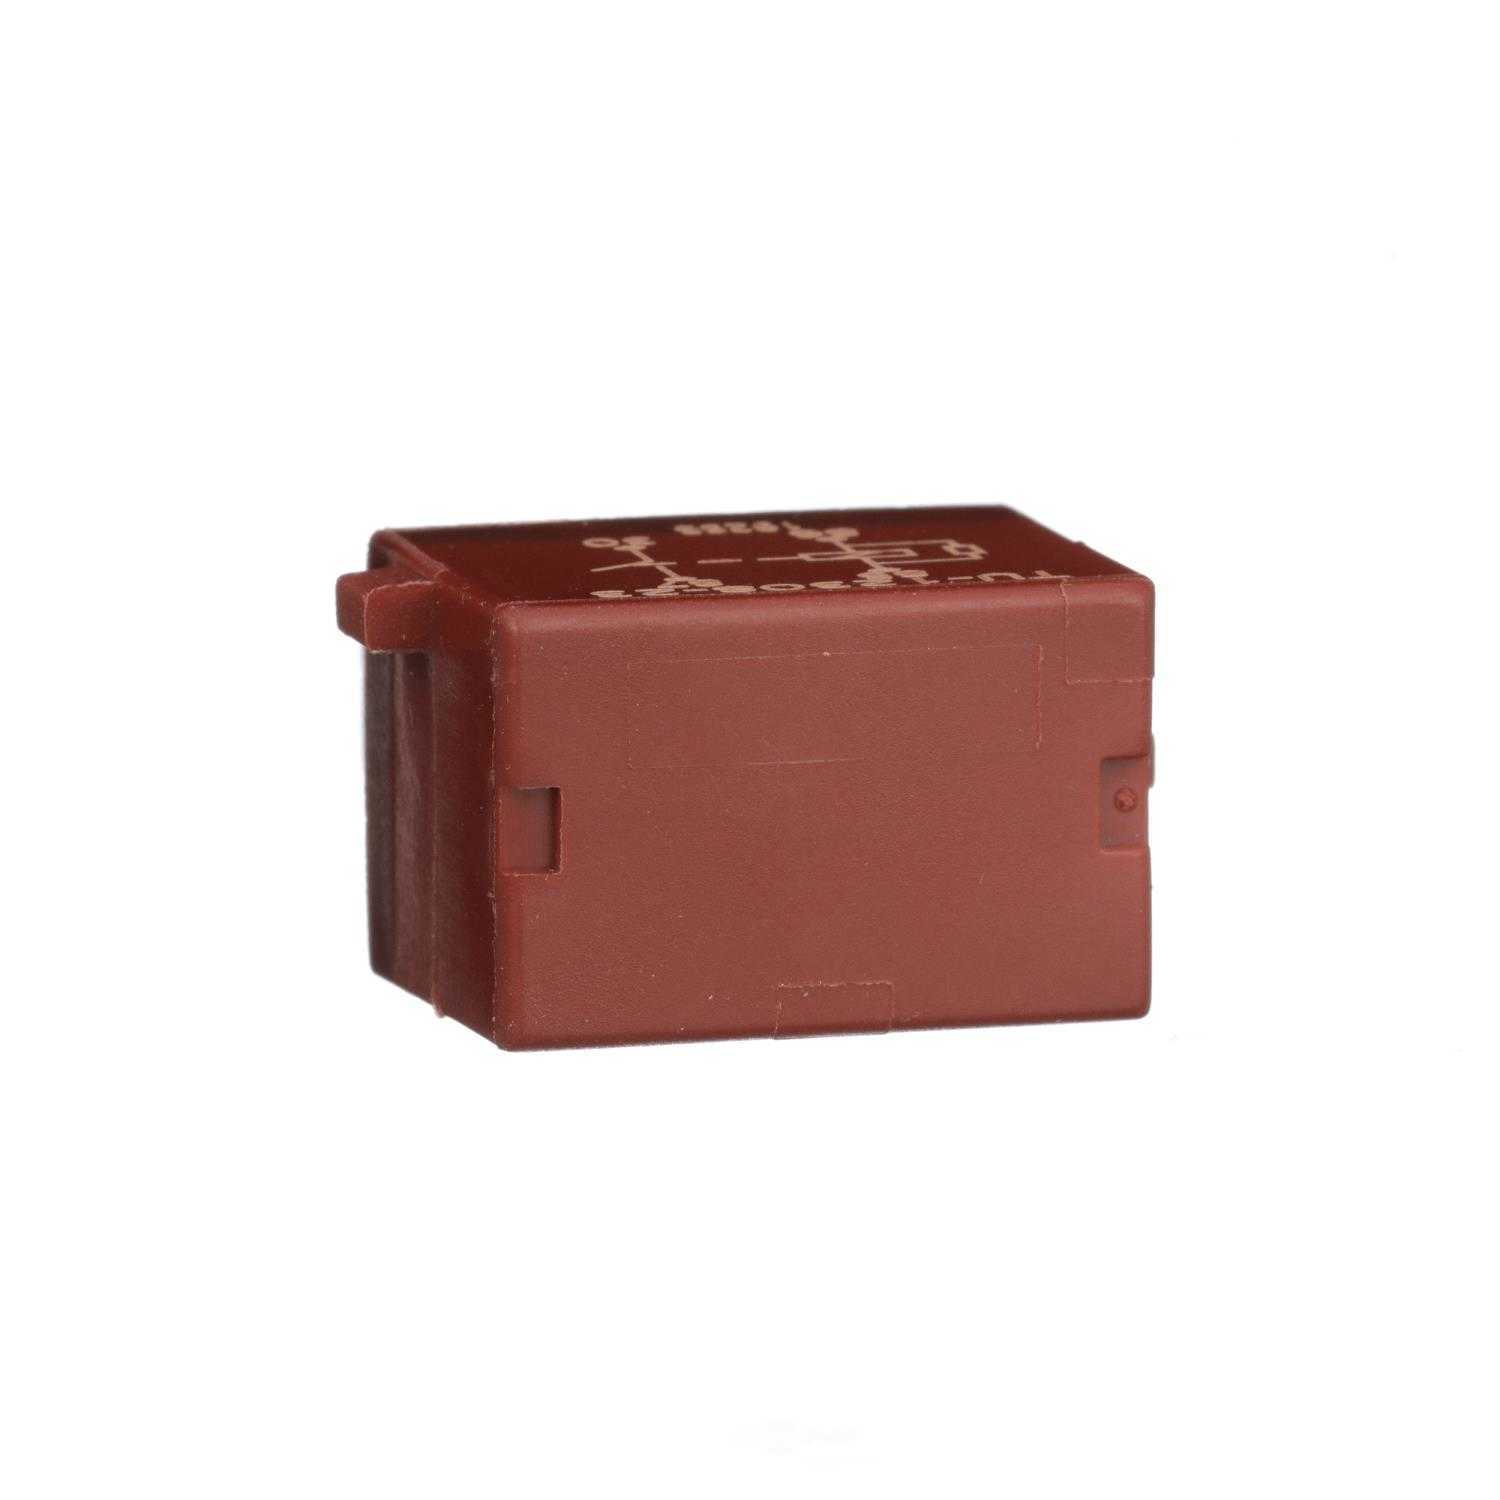 STANDARD MOTOR PRODUCTS - Fuel Injection Relay - STA RY-724